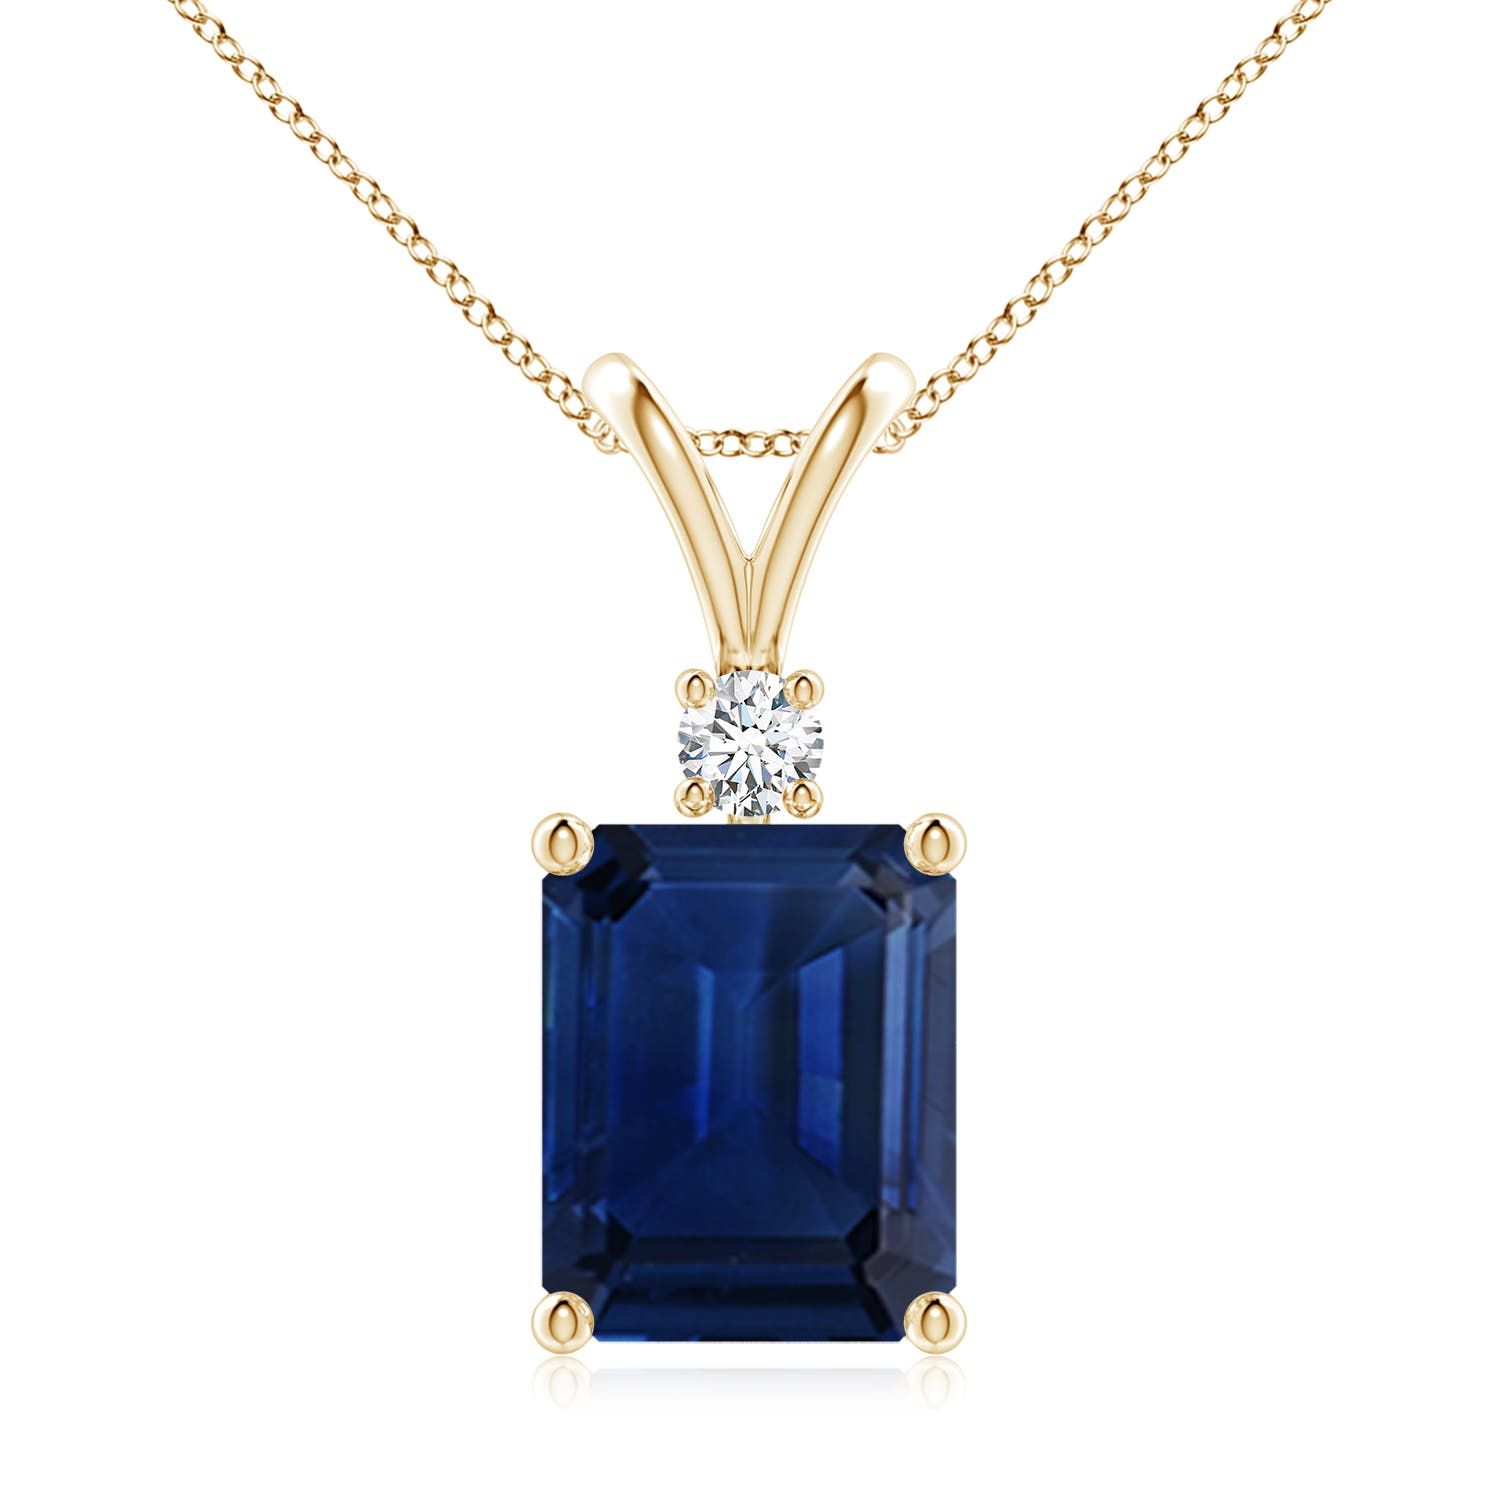 AAA - Blue Sapphire / 3.51 CT / 14 KT Yellow Gold